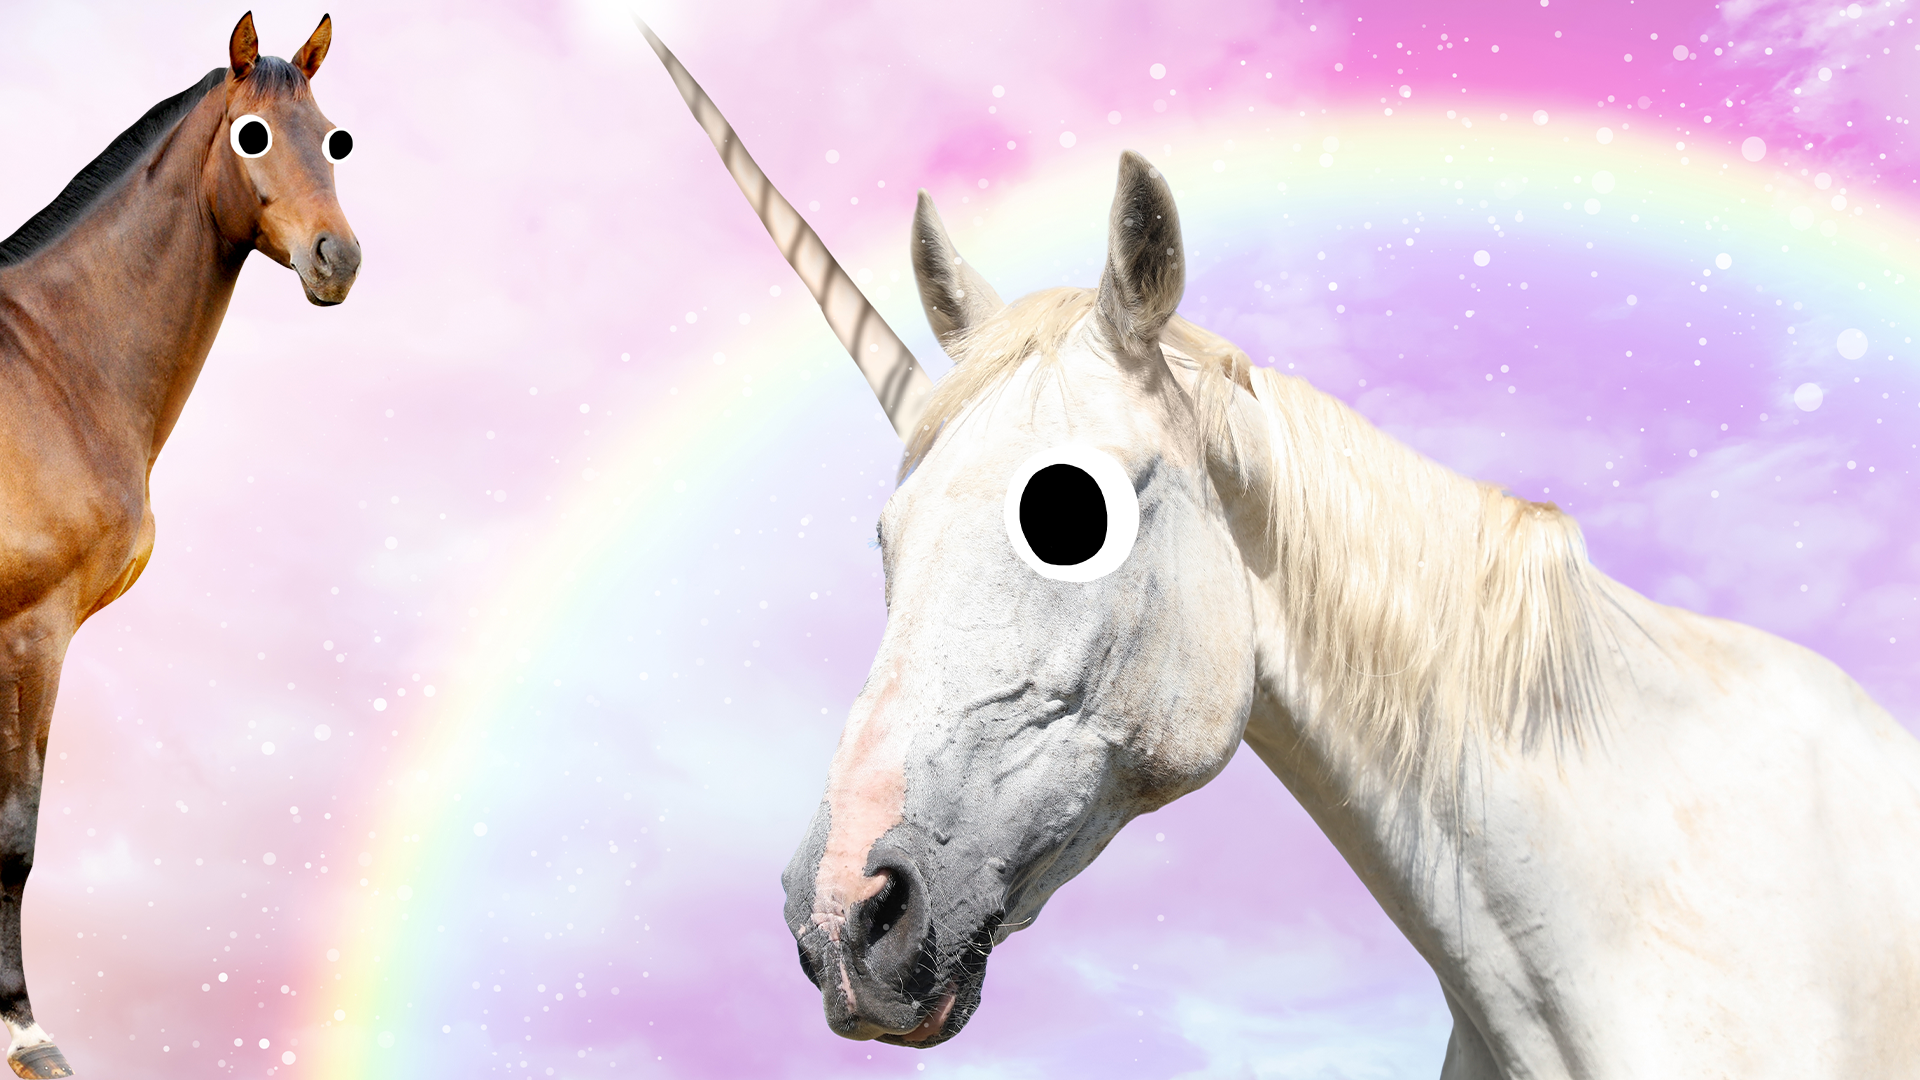 Unicorn and normal horse